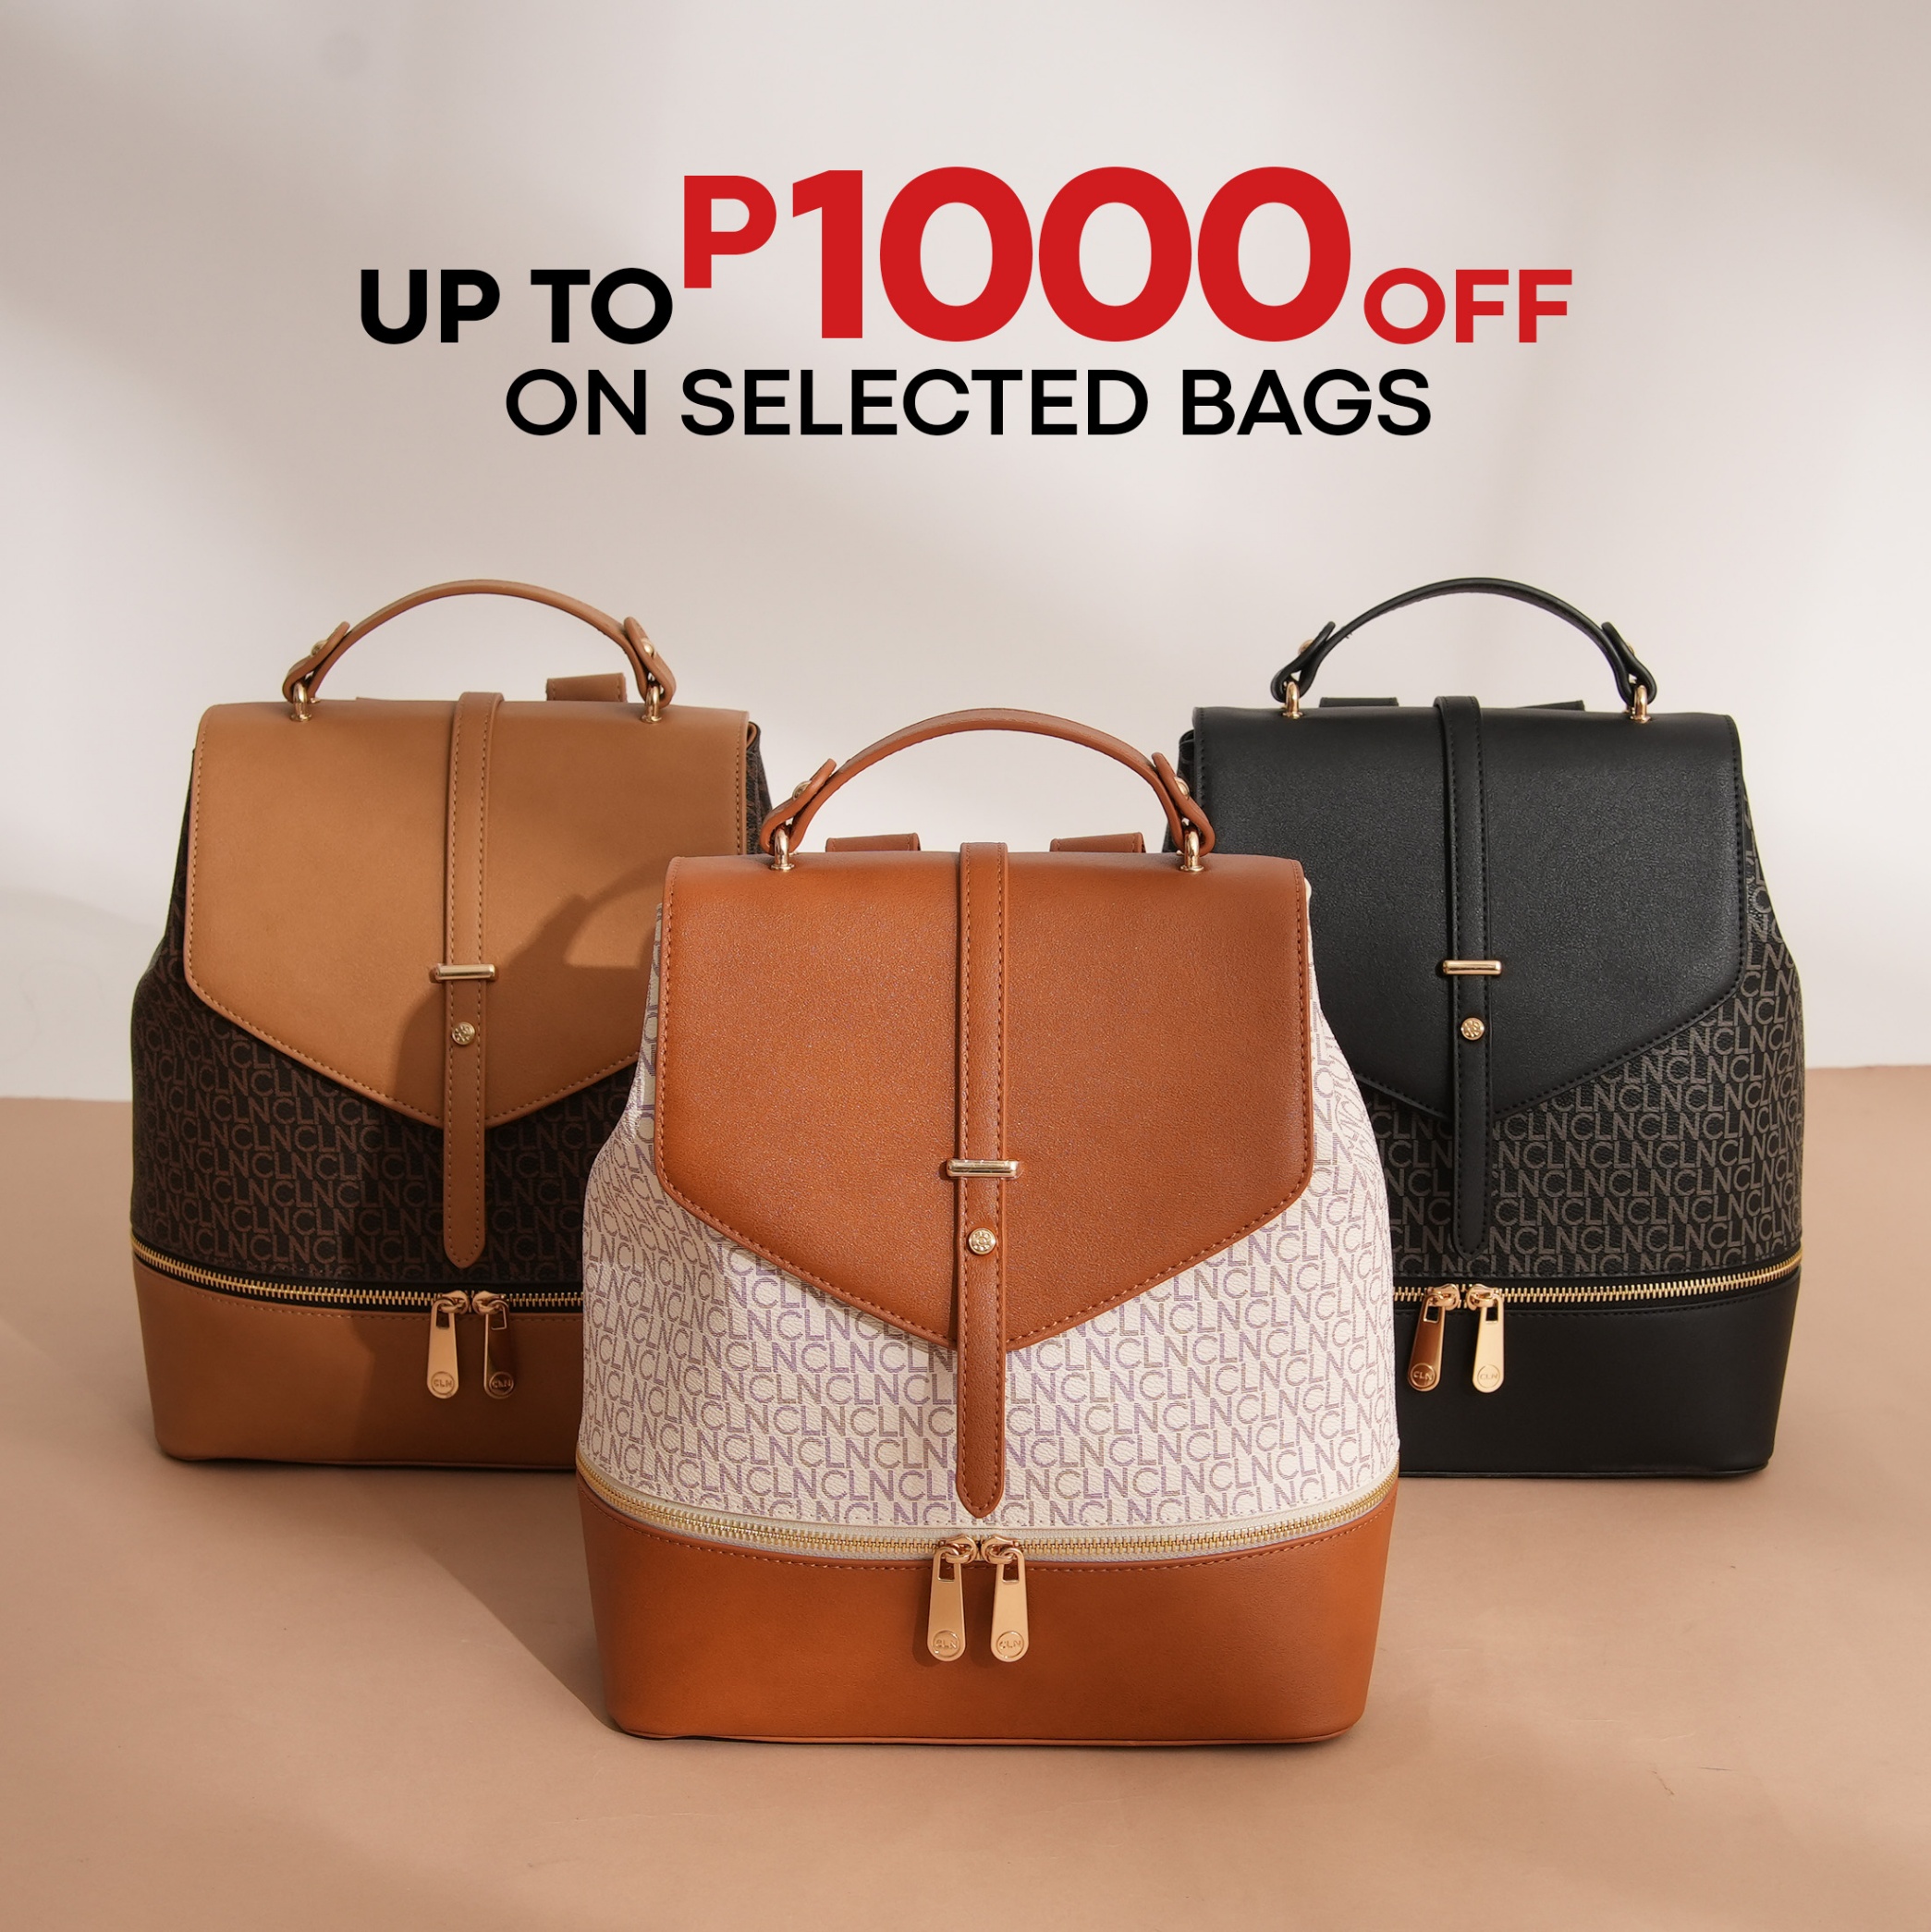 Shop cln bags for Sale on Shopee Philippines